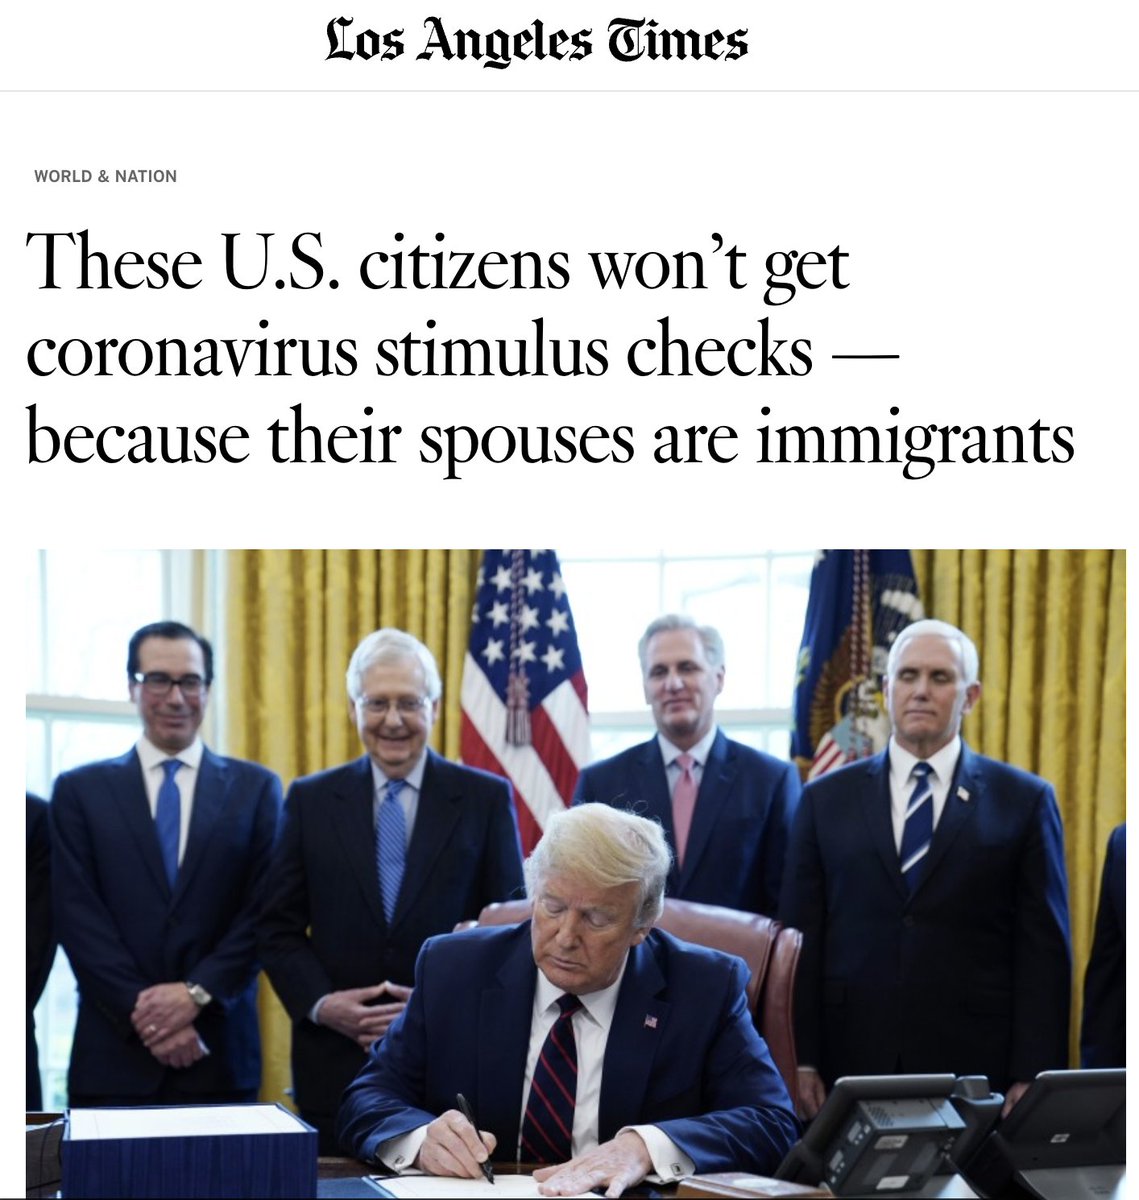 2) Trump's administration is preventing Americans from receiving aid if their spouses don't have a Social Security number. https://www.latimes.com/world-nation/story/2020-04-20/u-s-citizens-coronavirus-stimulus-checks-spouses-immigrants